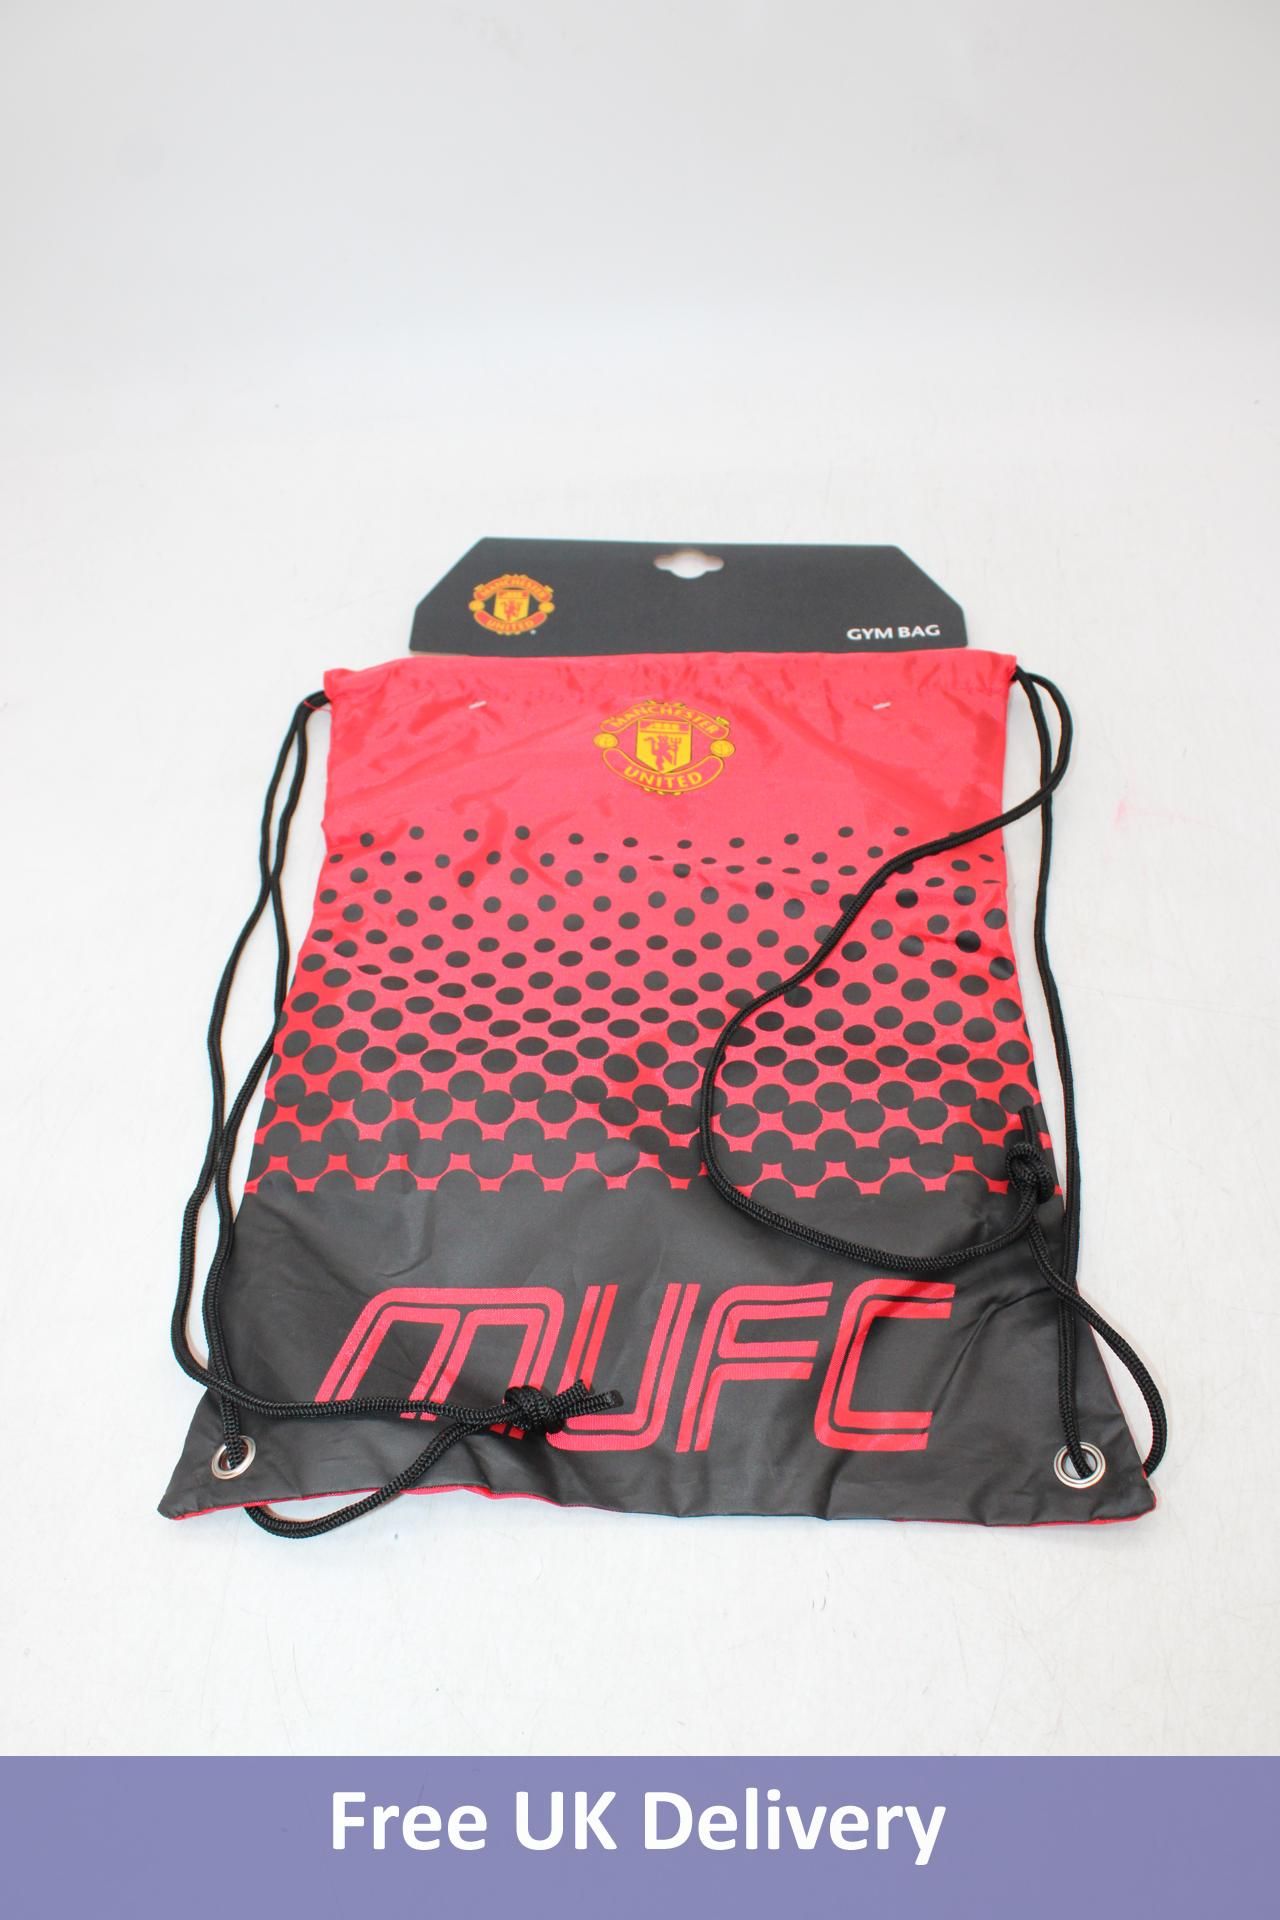 Ten Manchester United FC Drawstring Gym Bags, Red/Black